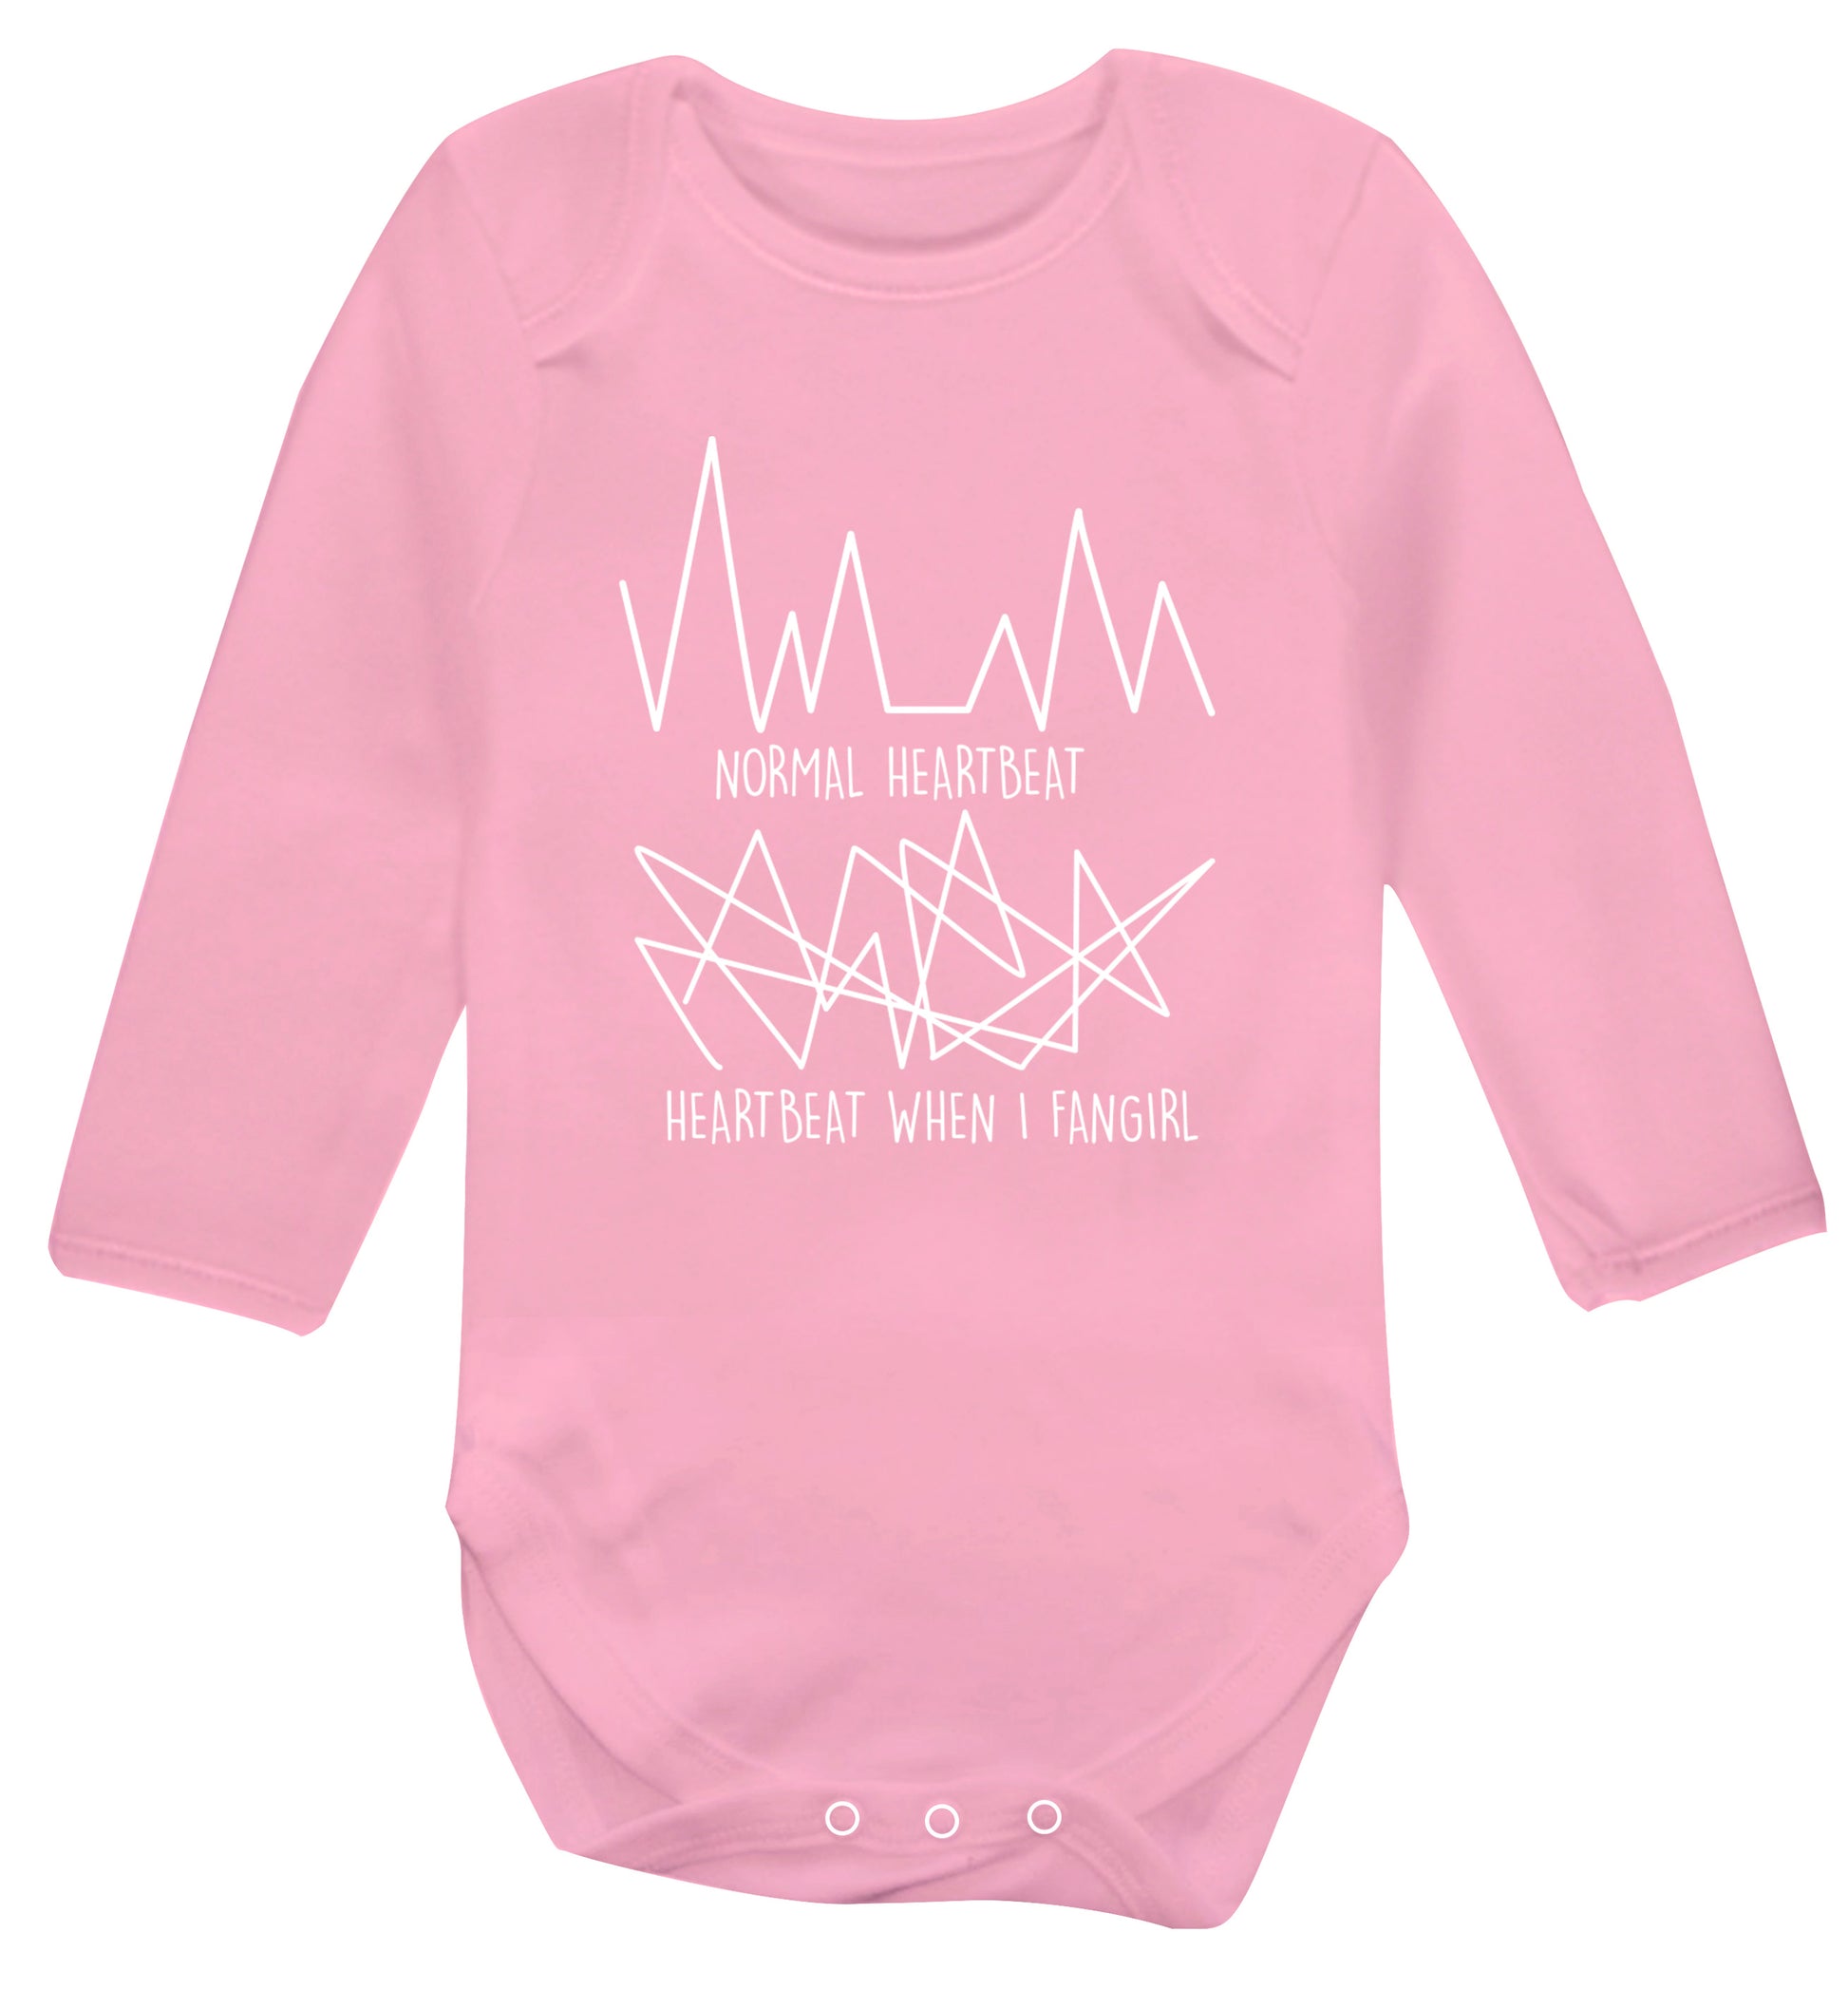 Normal heartbeat heartbeat when I fangirl Baby Vest long sleeved pale pink 6-12 months